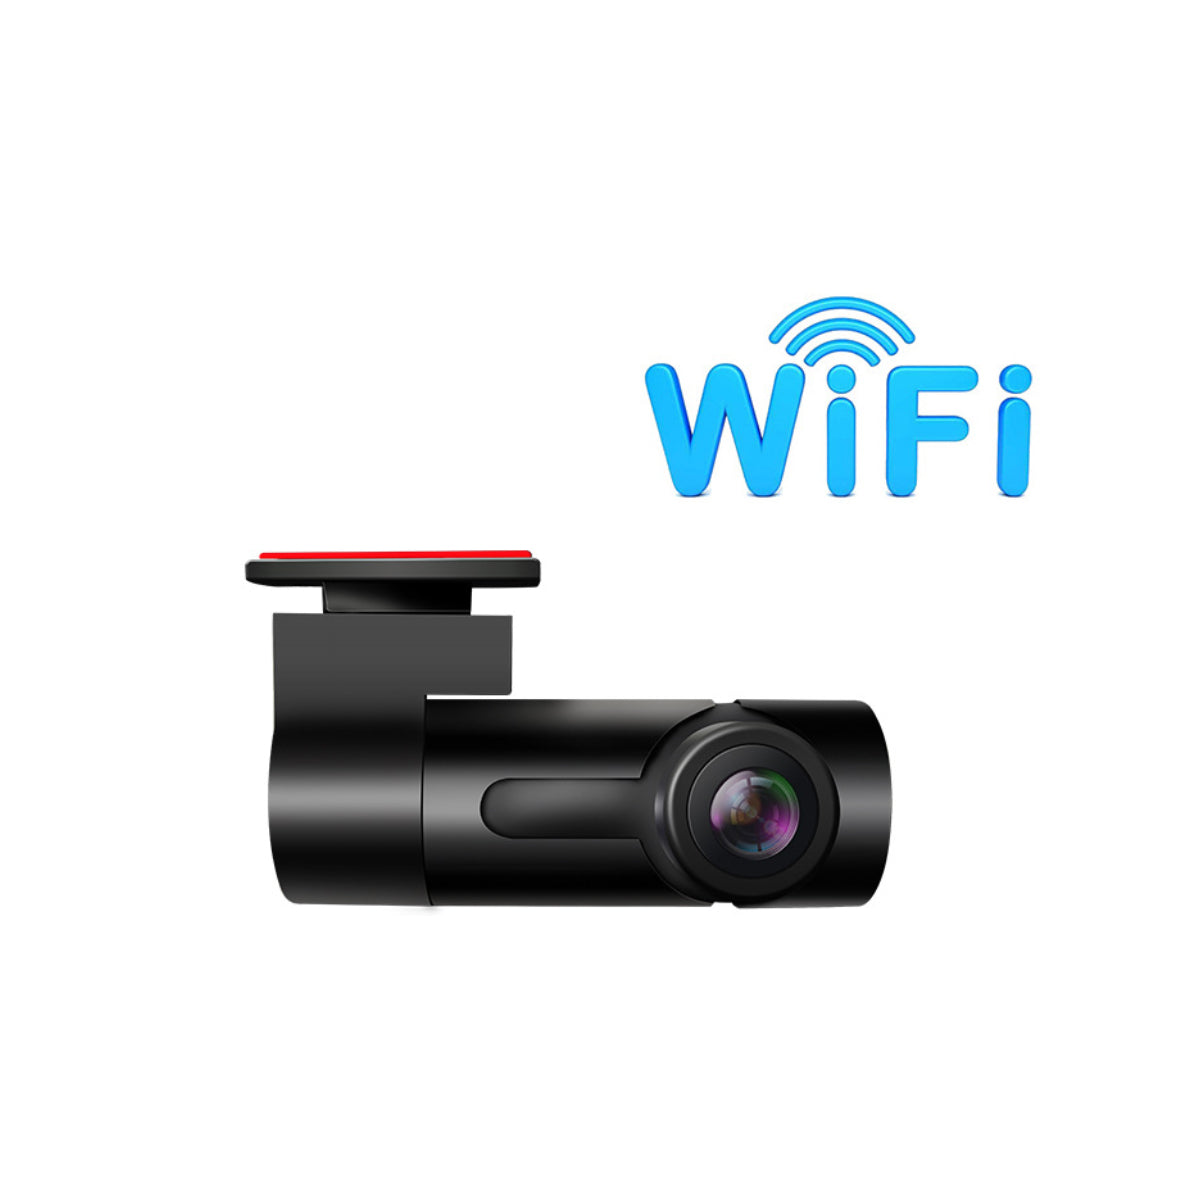 Car Dash Cam with WIFI and App by VistaShops